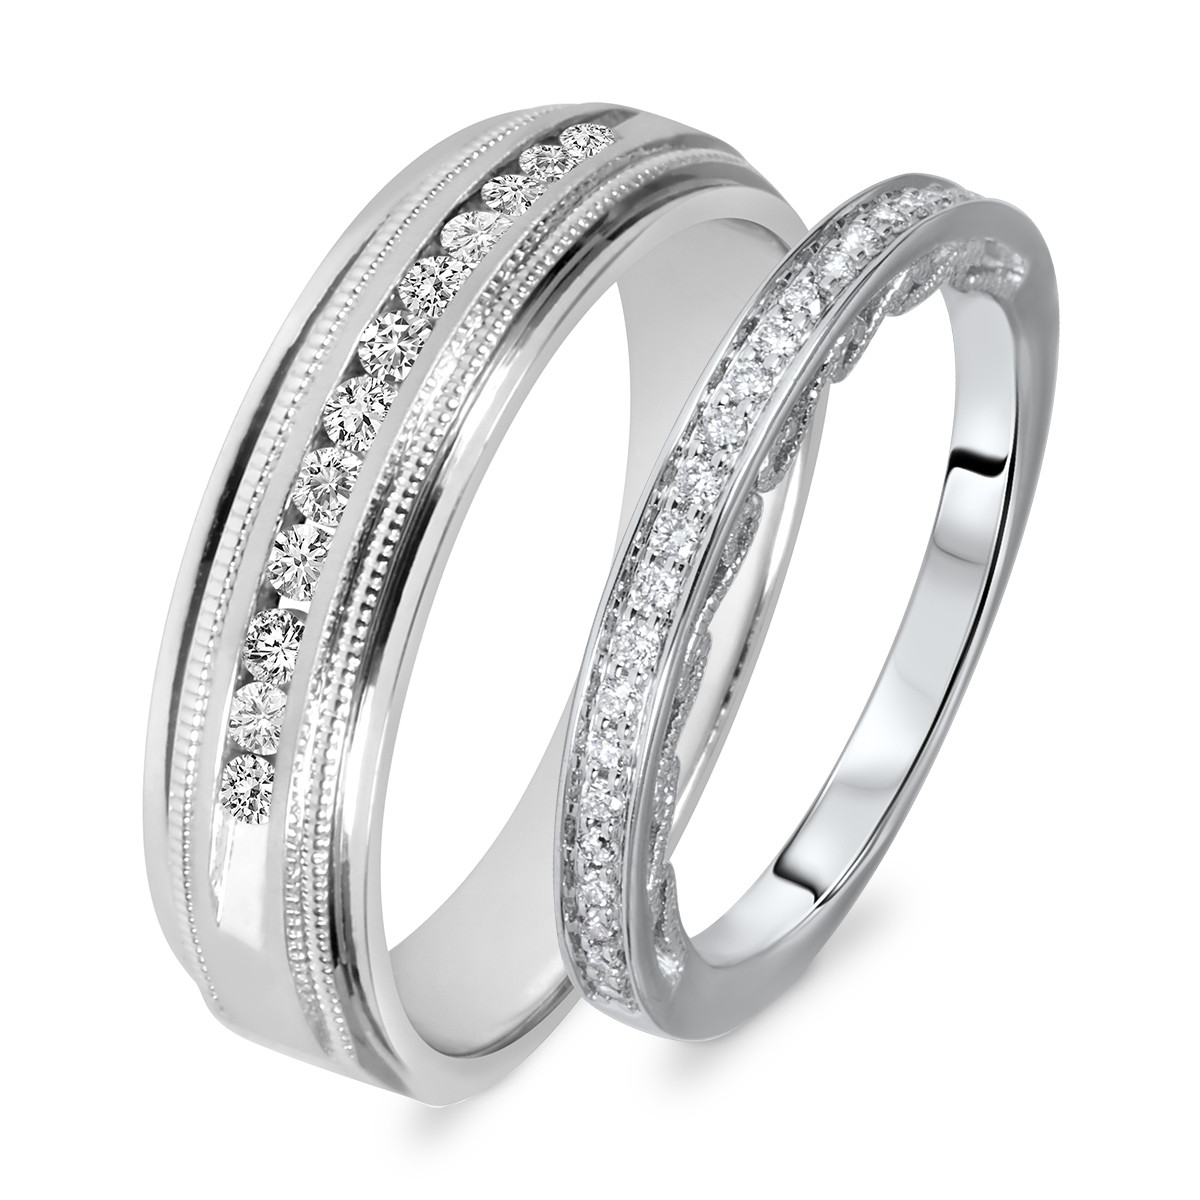 Wedding Ring His And Hers
 Gallery his & hers wedding bands sets Matvuk